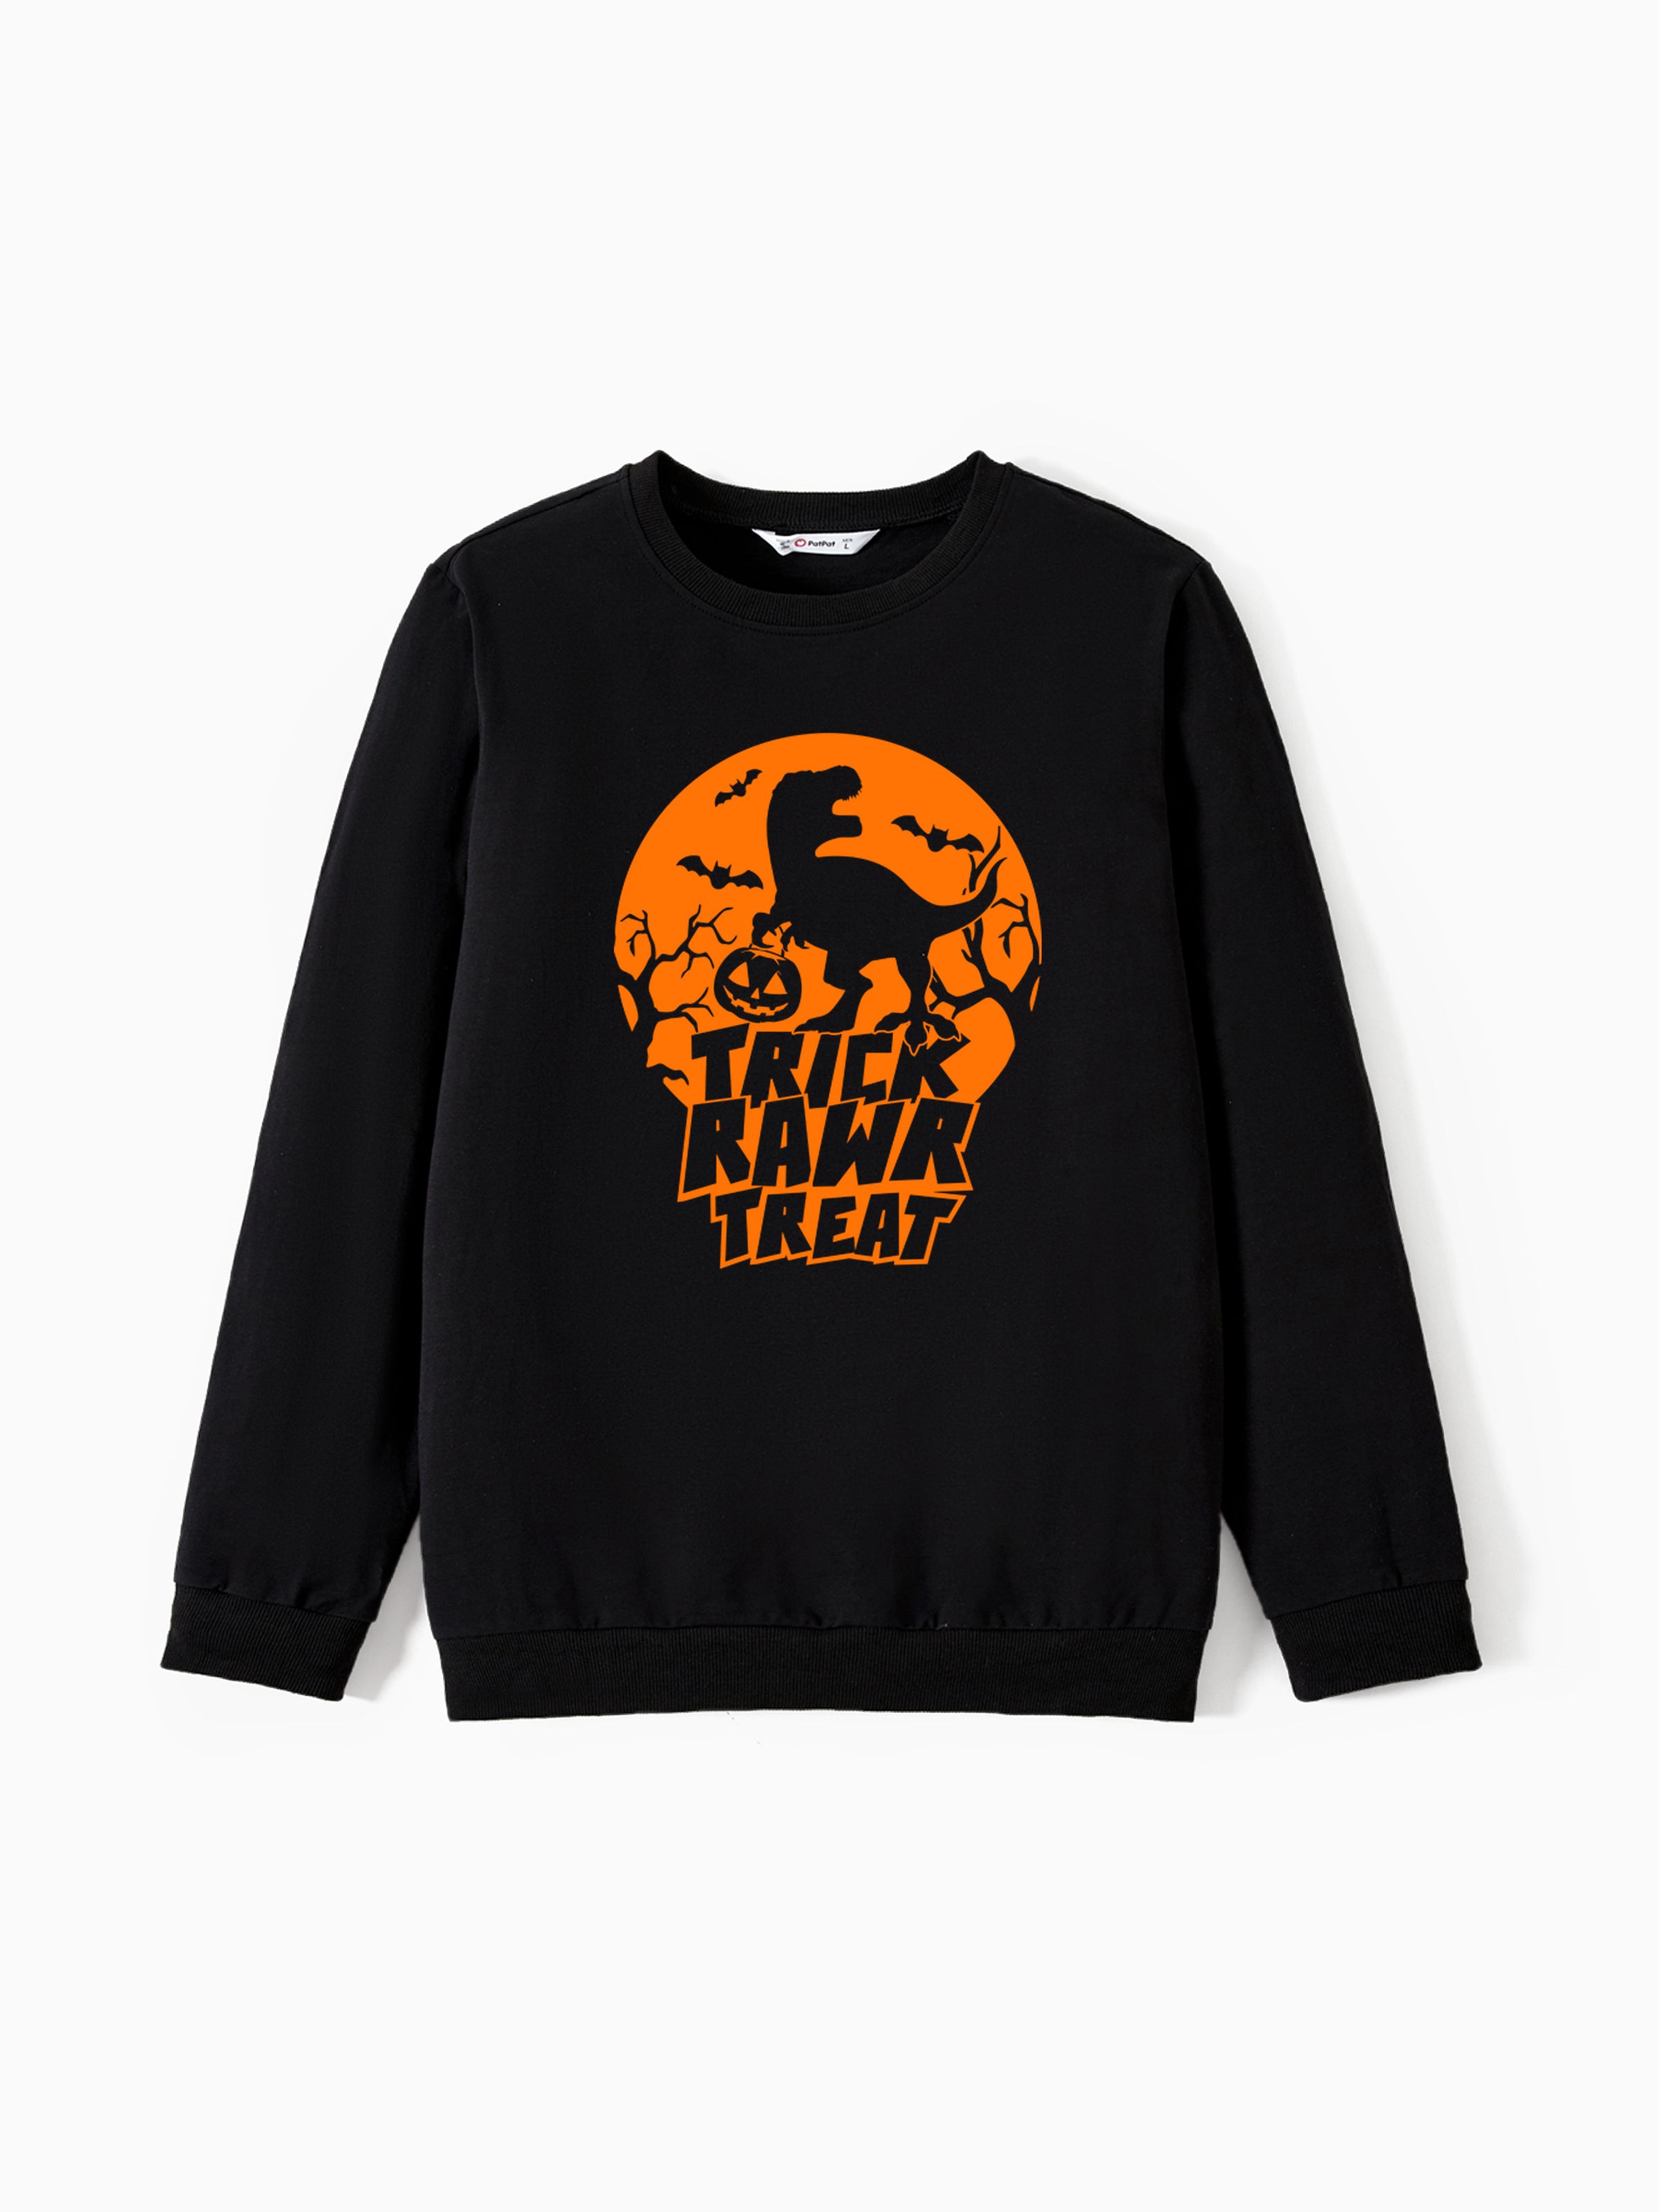 

Halloween Family Matching Spooky Dinosaur Graphic Trick or Treat Tops